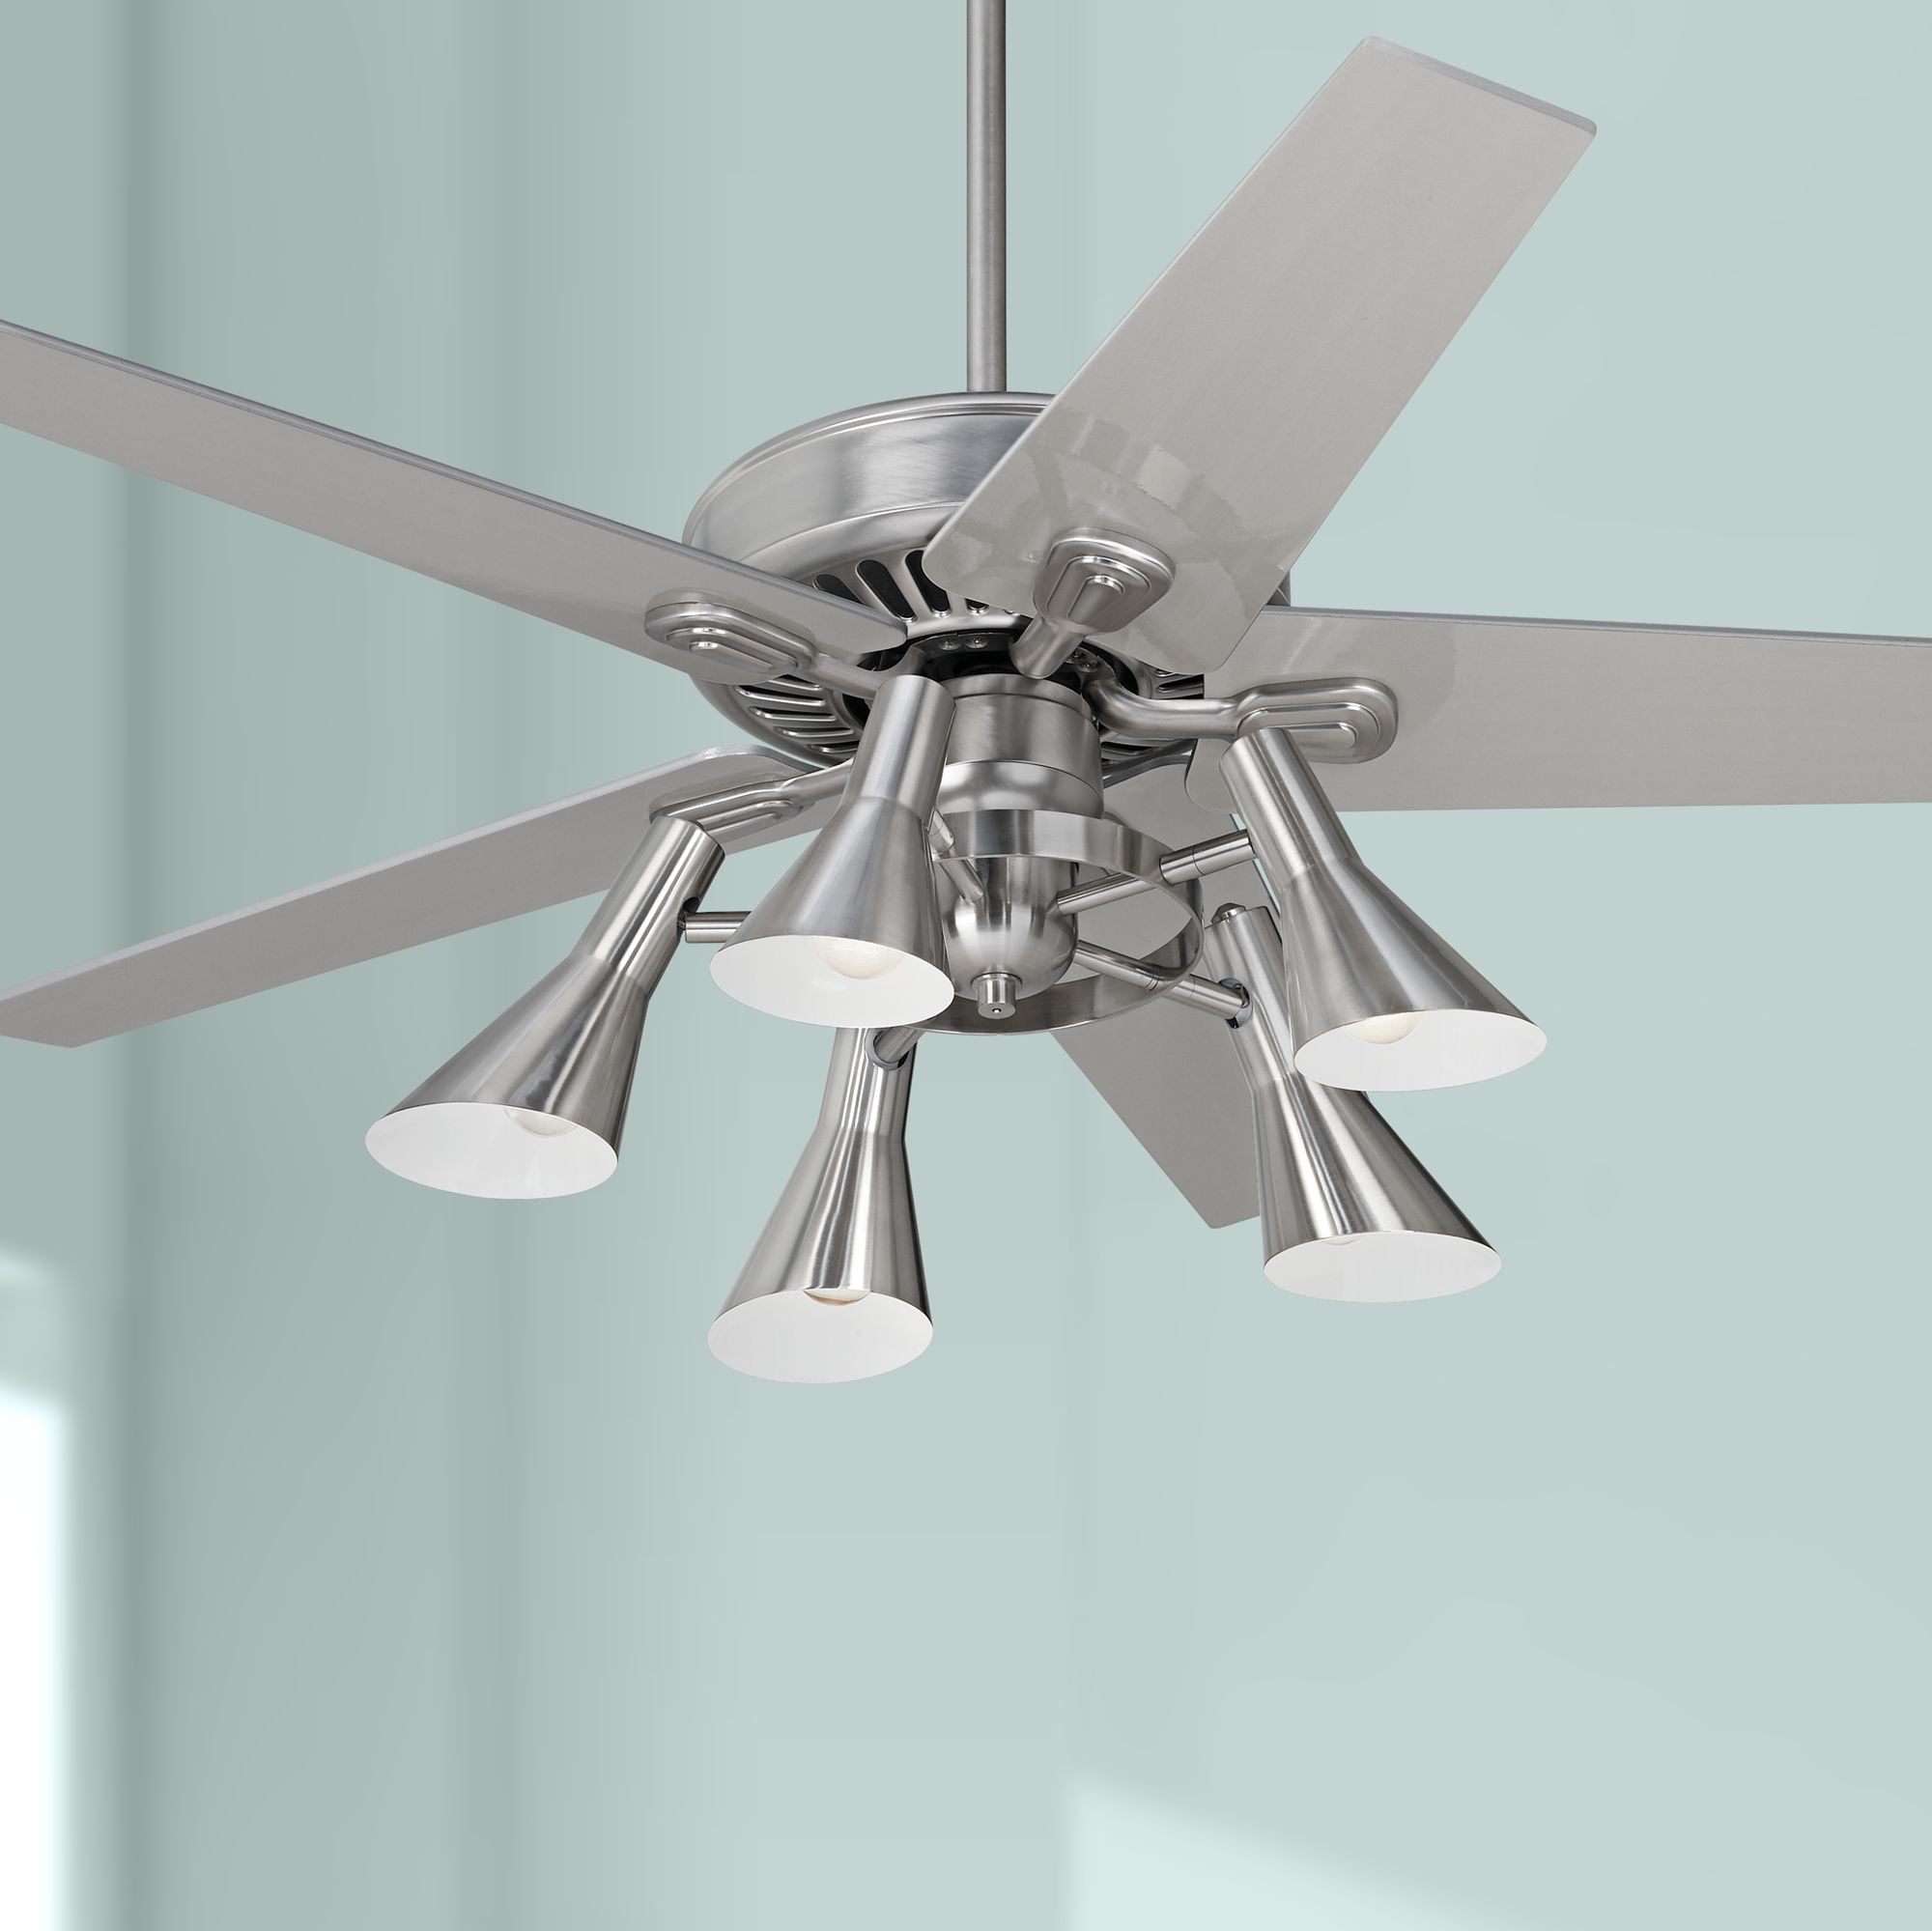 52 Casa Vieja Retro Ceiling Fan With Light Led Dimmable Brushed Nickel Silver Blades For Living Room Kitchen Bedroom Family Walmart Com